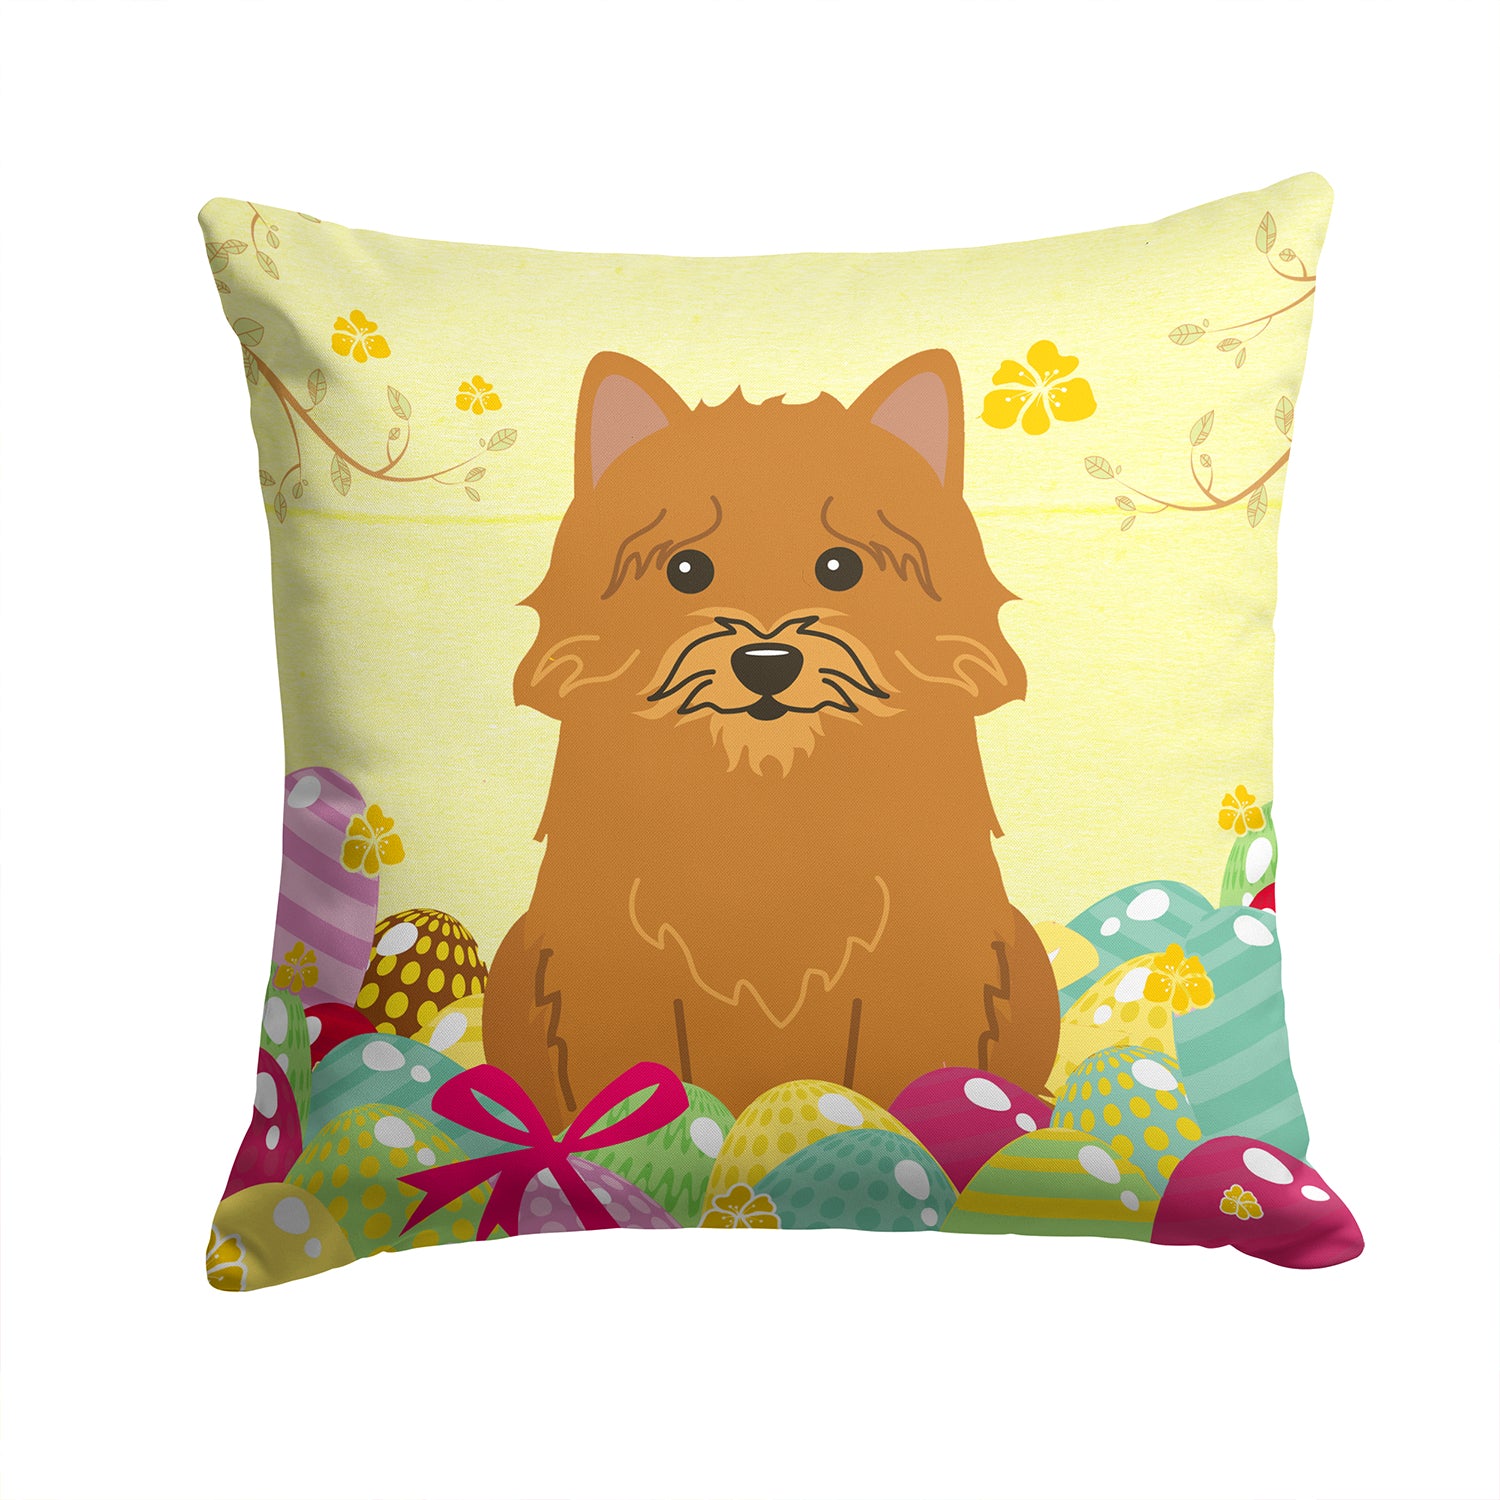 Easter Eggs Norwich Terrier Fabric Decorative Pillow BB6020PW1414 - the-store.com